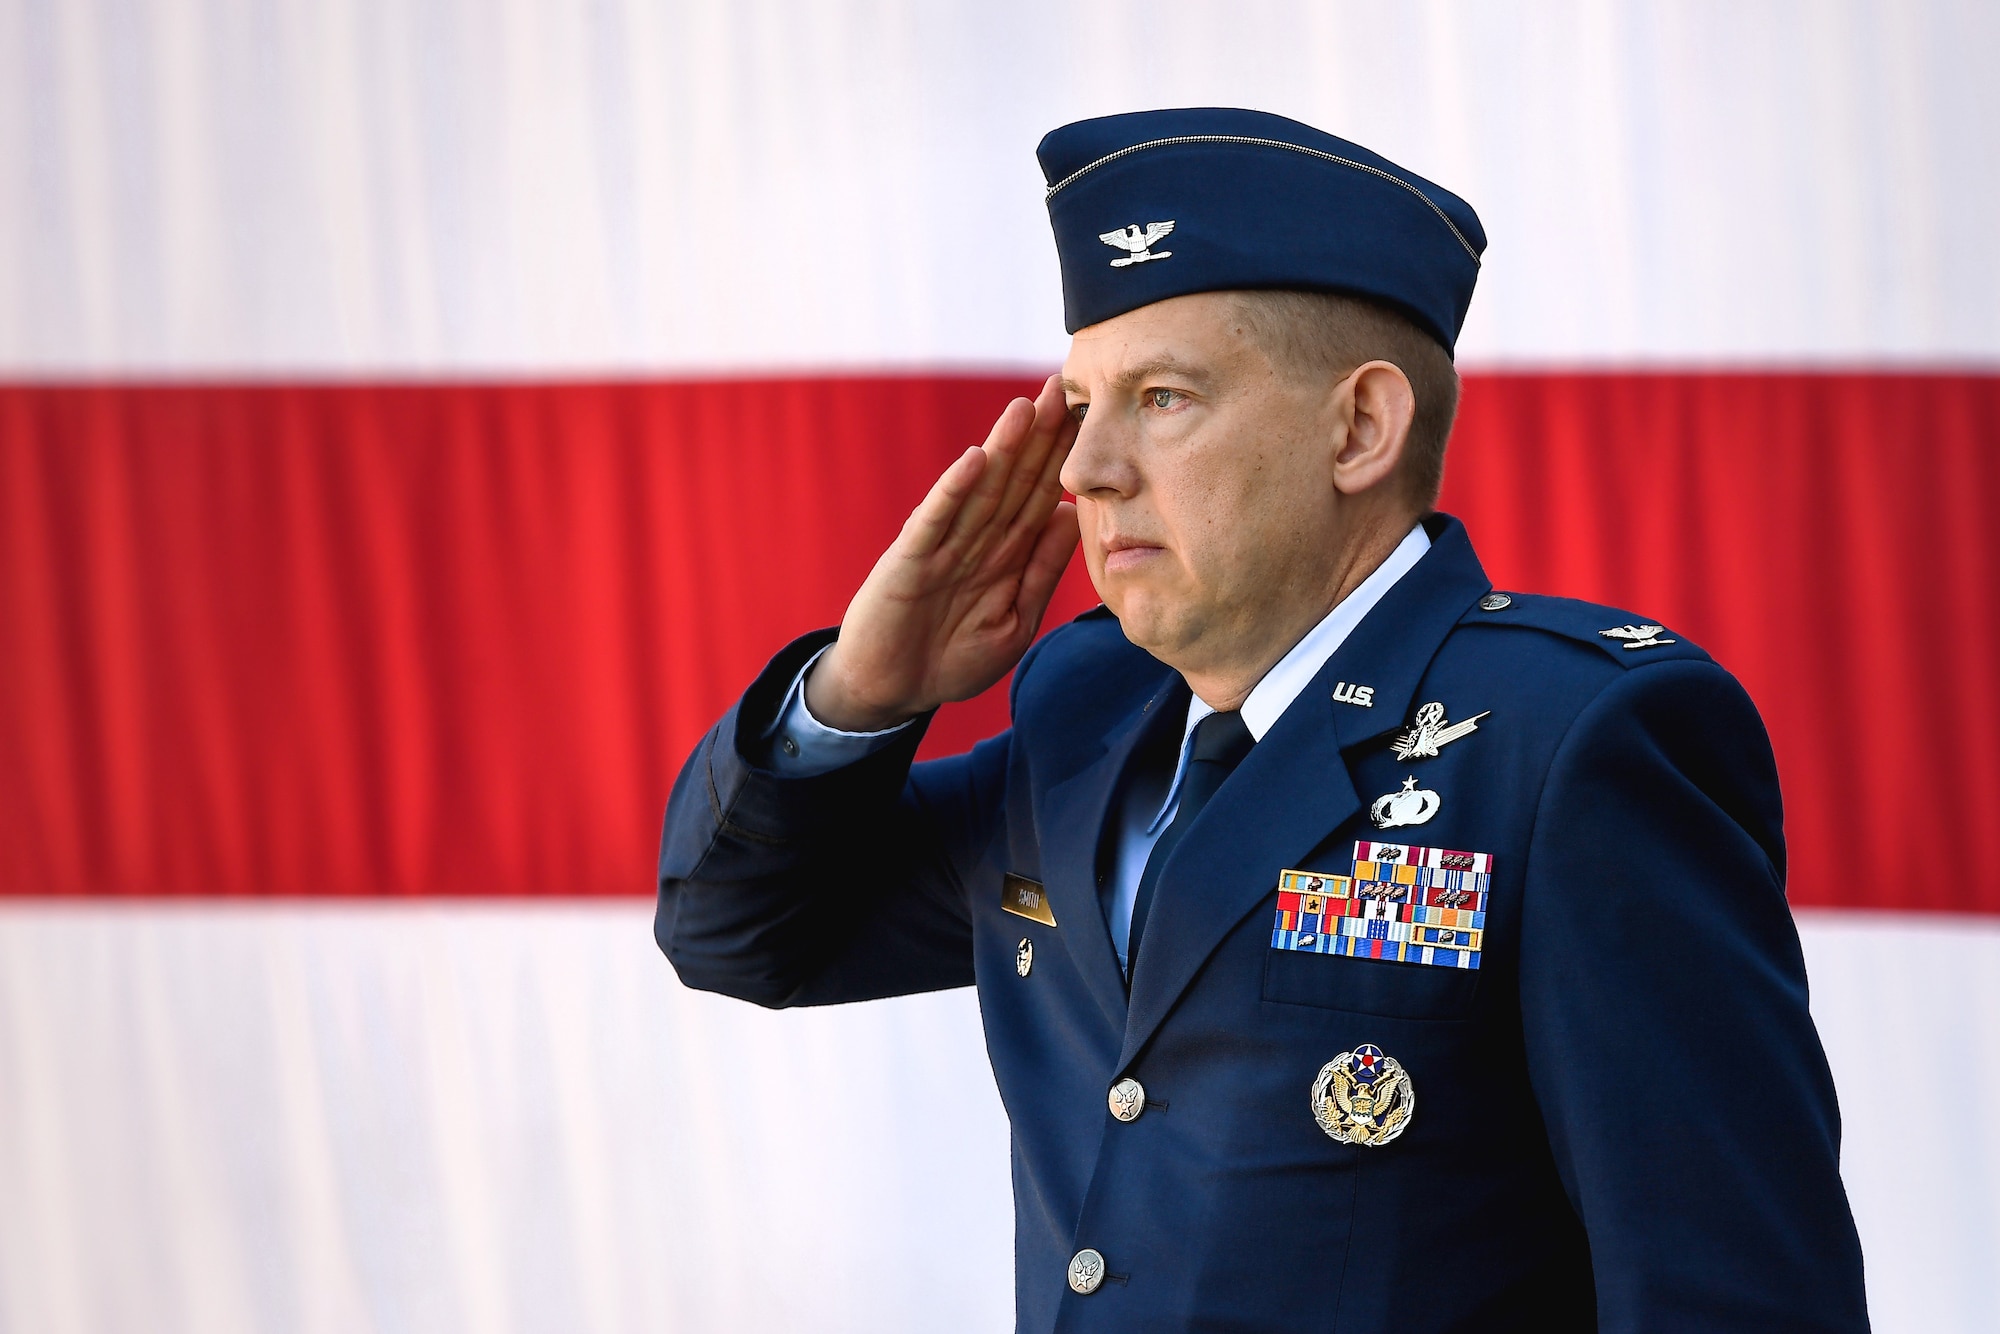 Col. James Smith, 50th Space Wing commander, renders his first salute as commander of the wing during a change of command ceremony in front of the DeKok building at Schriever Air Force Base, Colorado, June 24, 2019. The 50th SW is responsible for 185 communications, navigation and surveillance satellites and is geographically spread across the world in 14 operating locations. (U.S. Air Force photo by Kathryn Calvert)